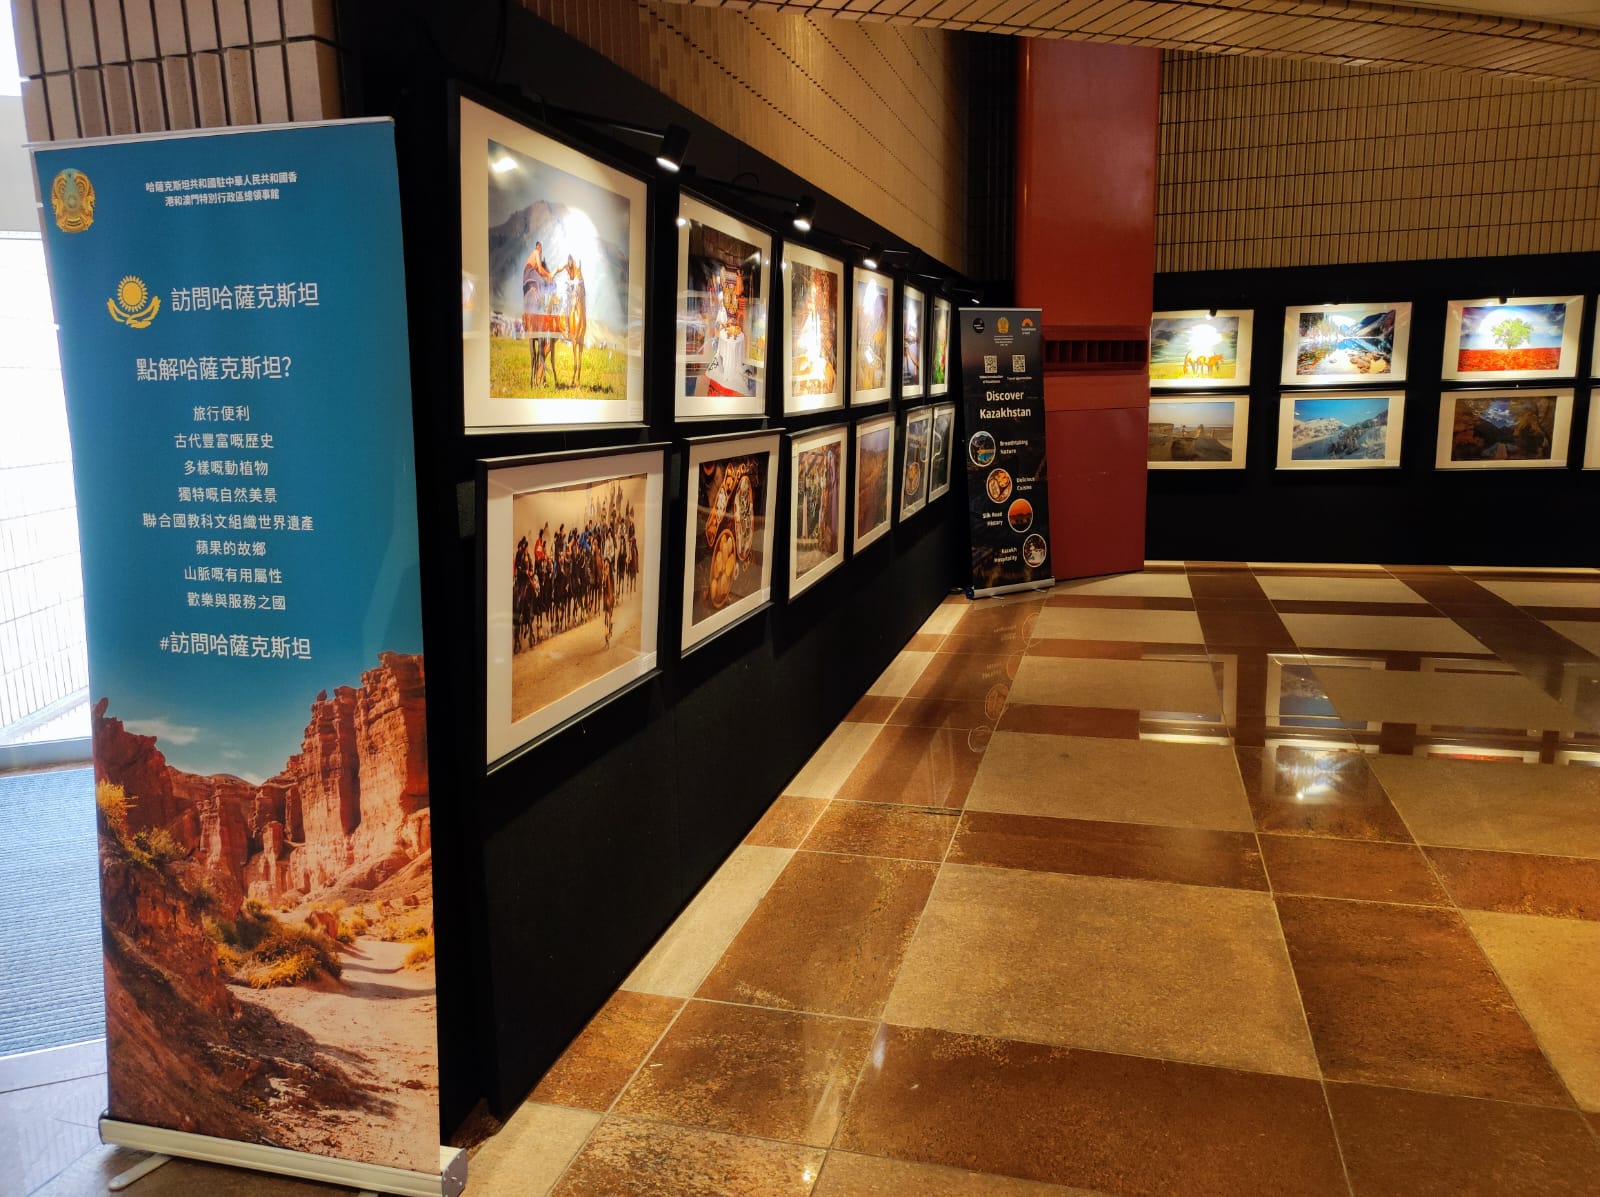 A photo exhibition dedicated to the tourism potential of Kazakhstan is being held in Hong Kong